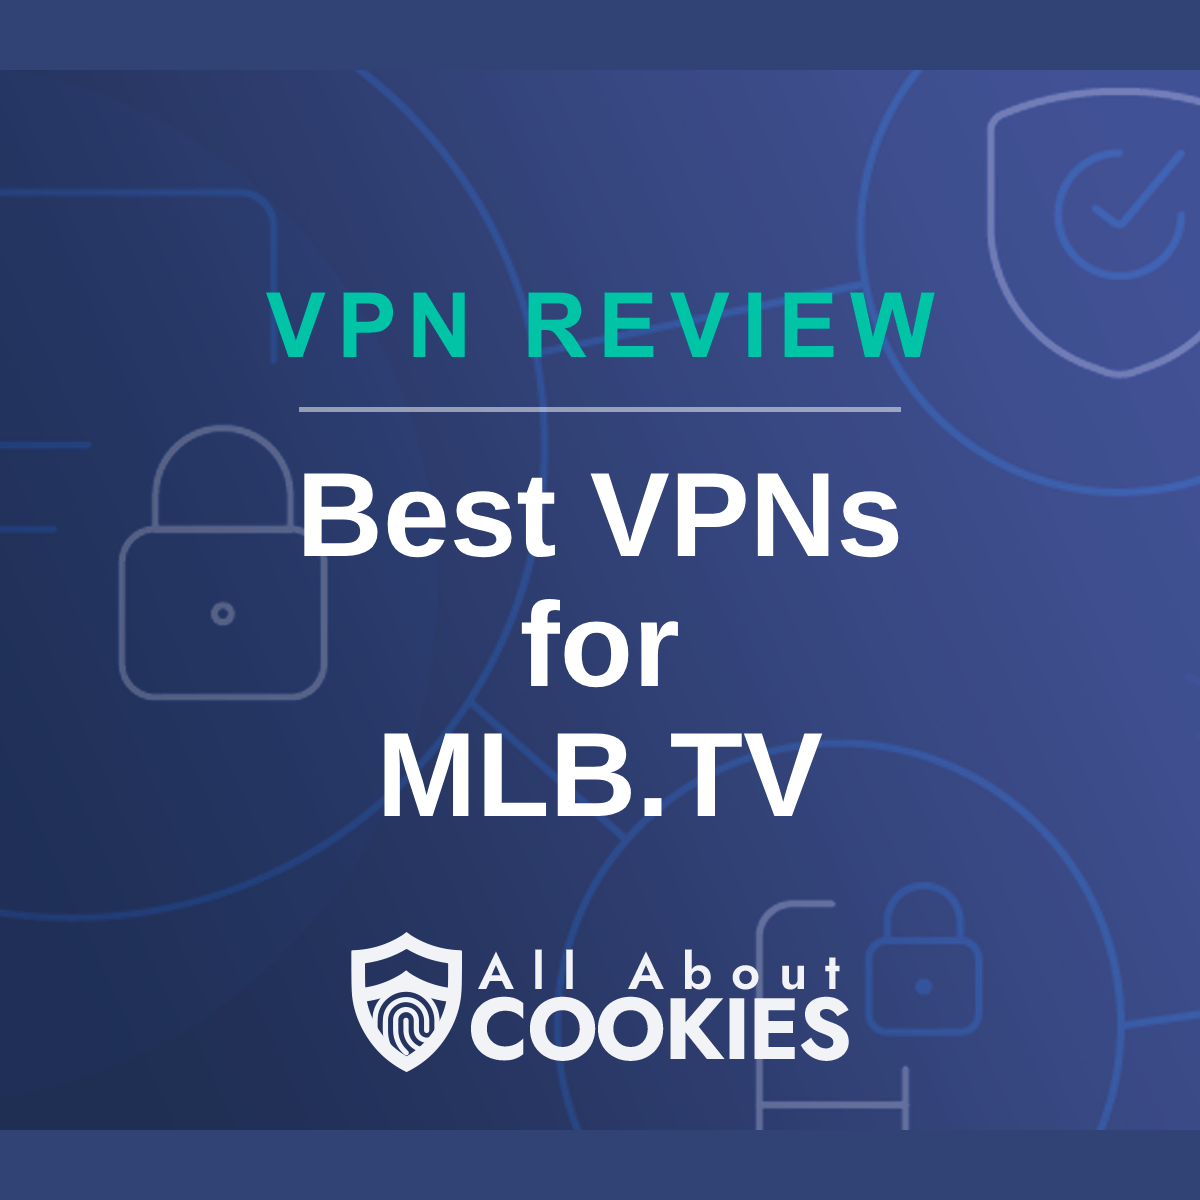 A blue background with images of locks and shields with the text &quot;Best VPNs for MLB.TV&quot; and the All About Cookies logo. 